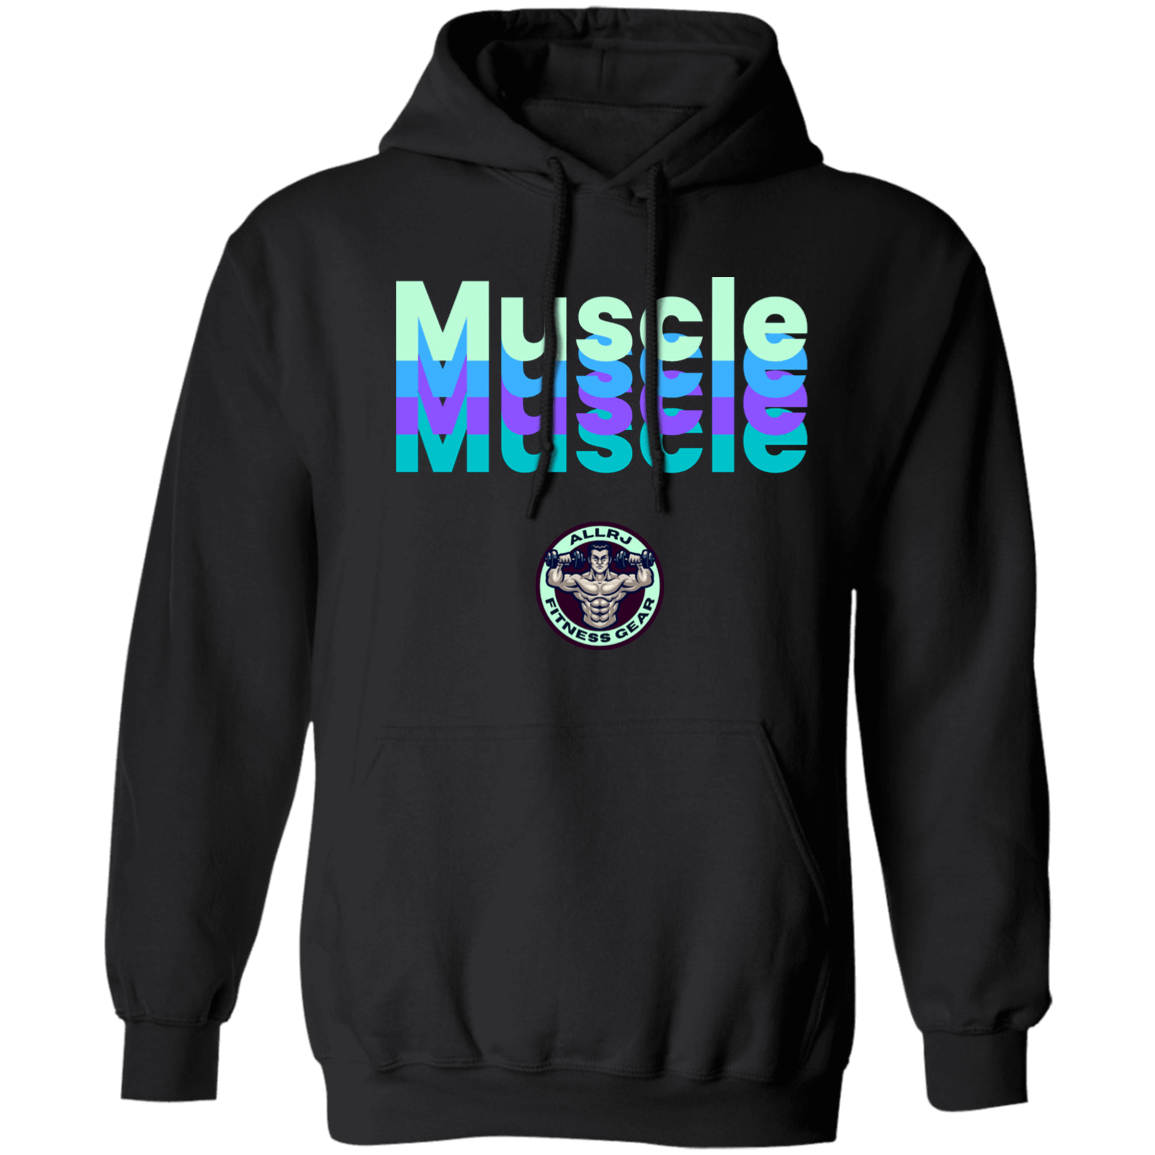 Allrj Muscle Pullover Hoodie Black